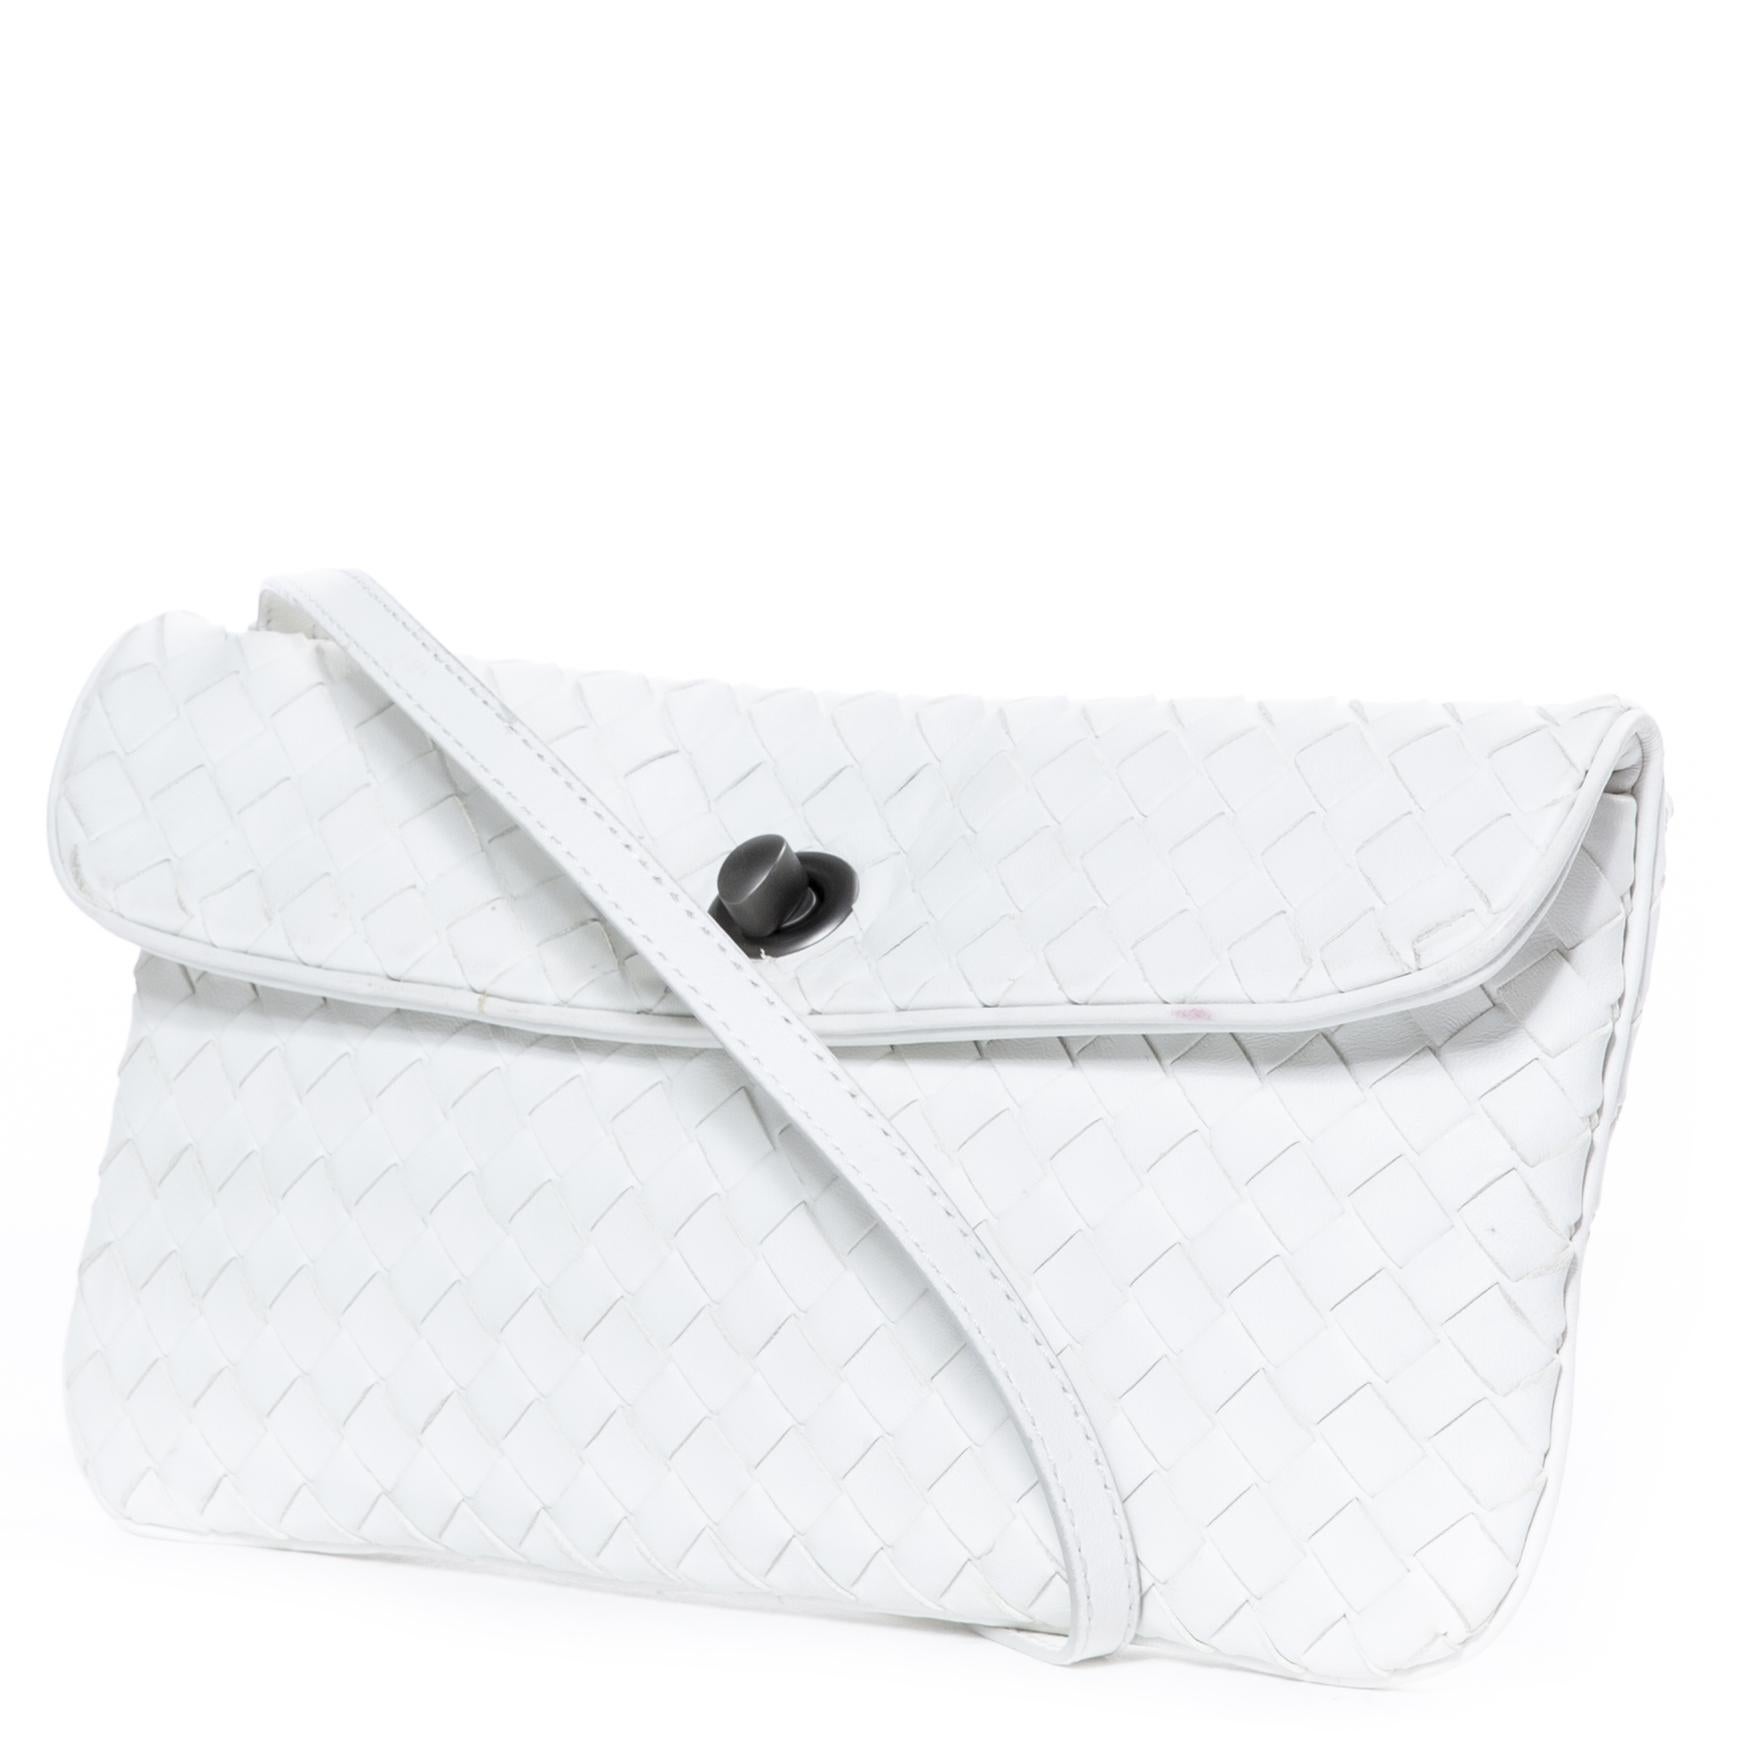 Very good preloved condition

Bottega Veneta White Nappa Leather Crossbody Bag

This bag is styled in a white nappa leather and featured in Bottega's signature woven leather. 
The crossbody opens with a silver-toned turn lock. 
